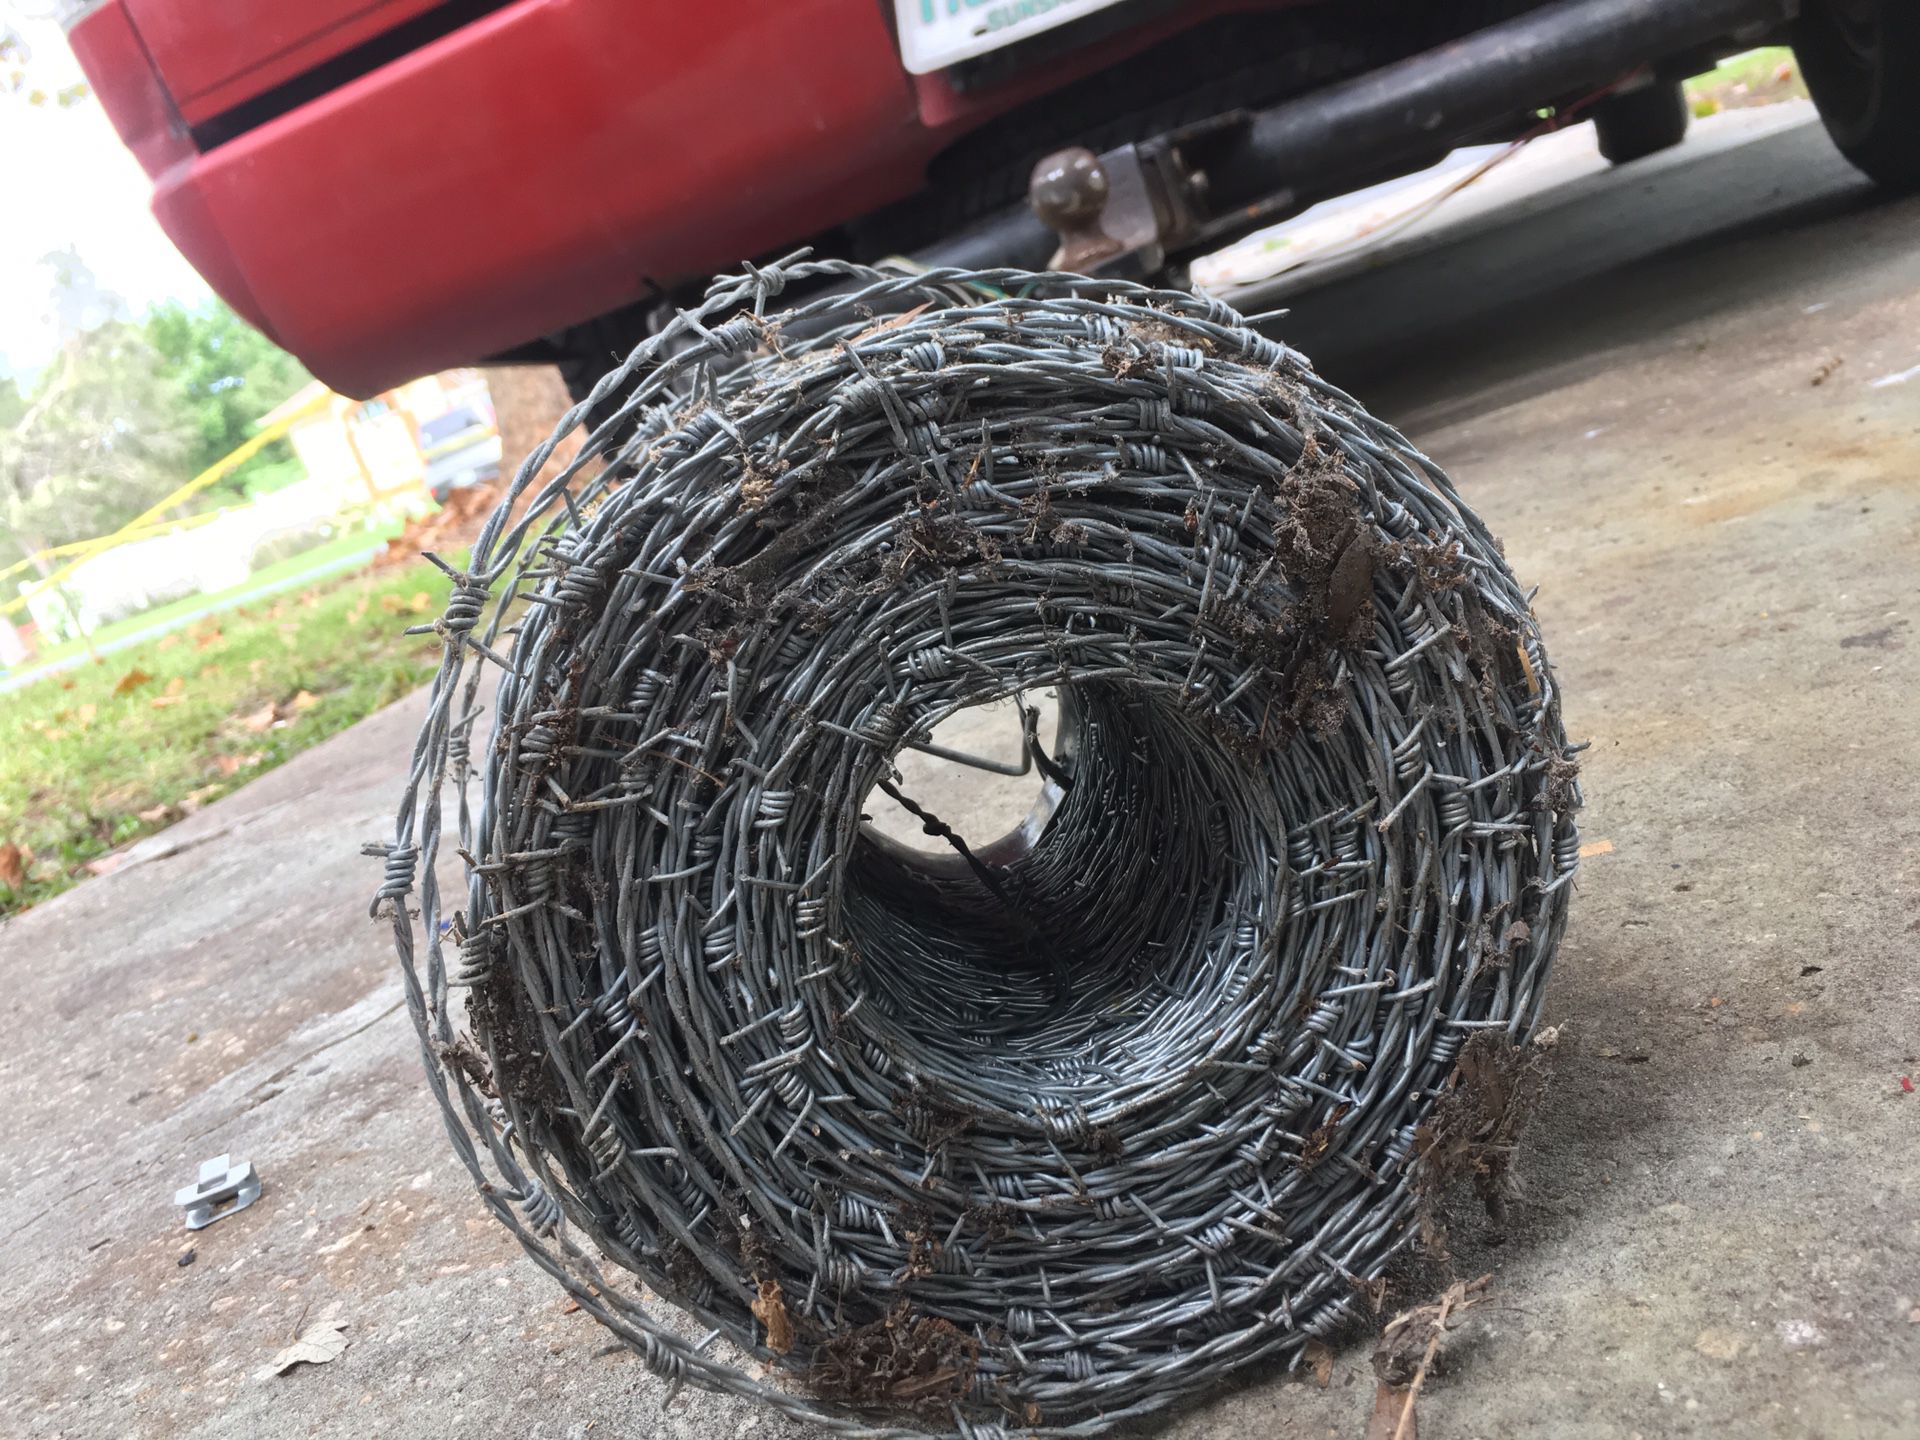 1300+ft of barb wire